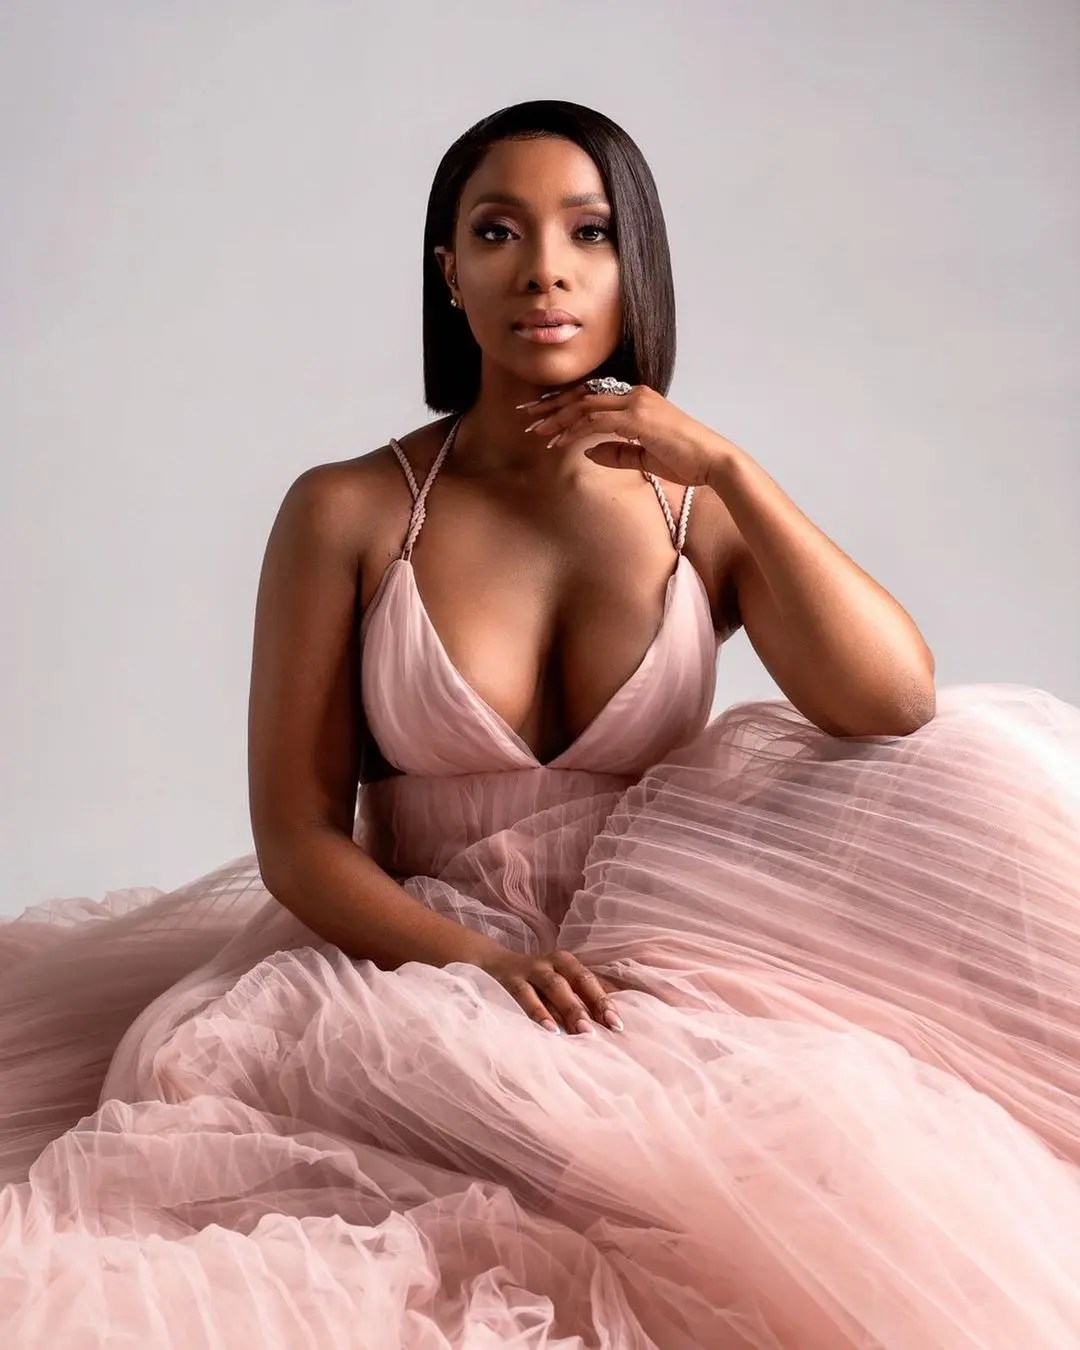 Pearl Modiadie on her new acting role